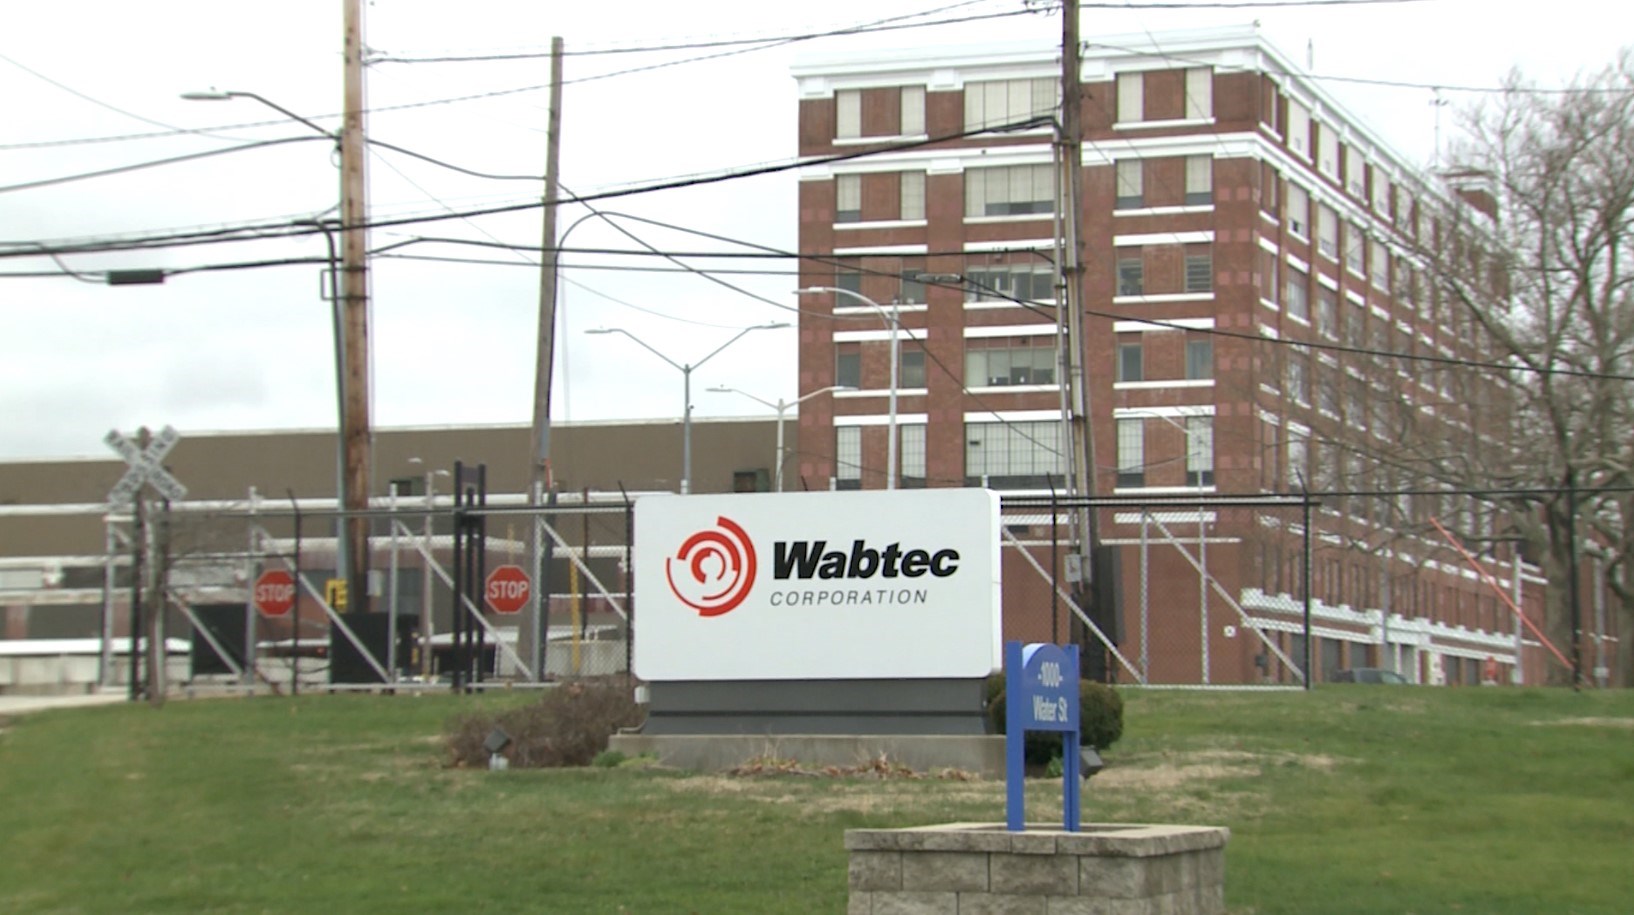 Union Provides Update on Contract Negotiations with Wabtec